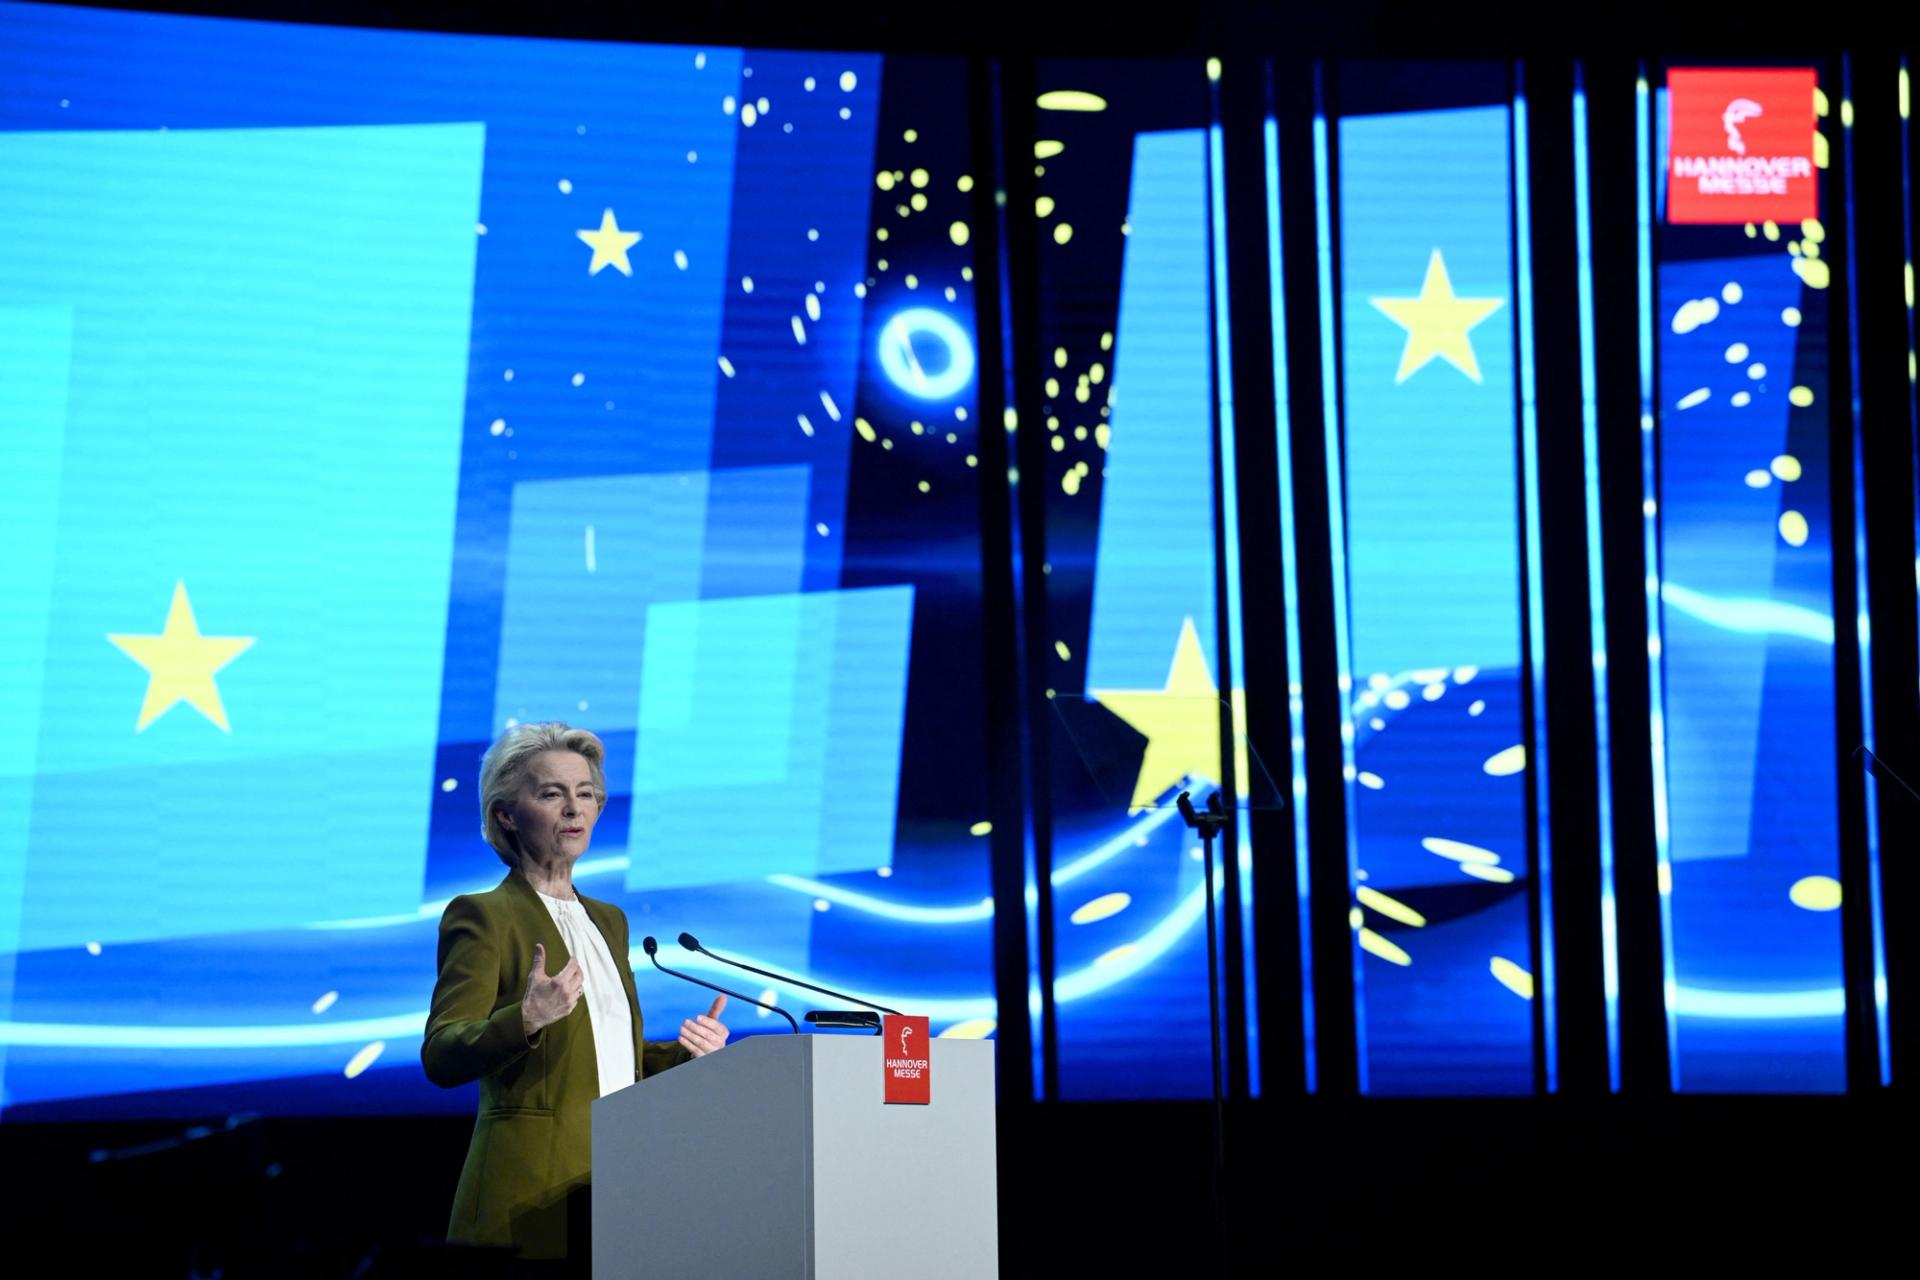 European Commission President Ursula von der Leyen speaks during an opening ceremony of the industry trade fair Hannover Messe with a focus on carbon-neutral production, industries 4.0, energy for industry, artificial intelligence, hydrogen and fuel cells at the Congress Center, in Hanover, Germany April 21, 2024. REUTERS/Annegret Hilse